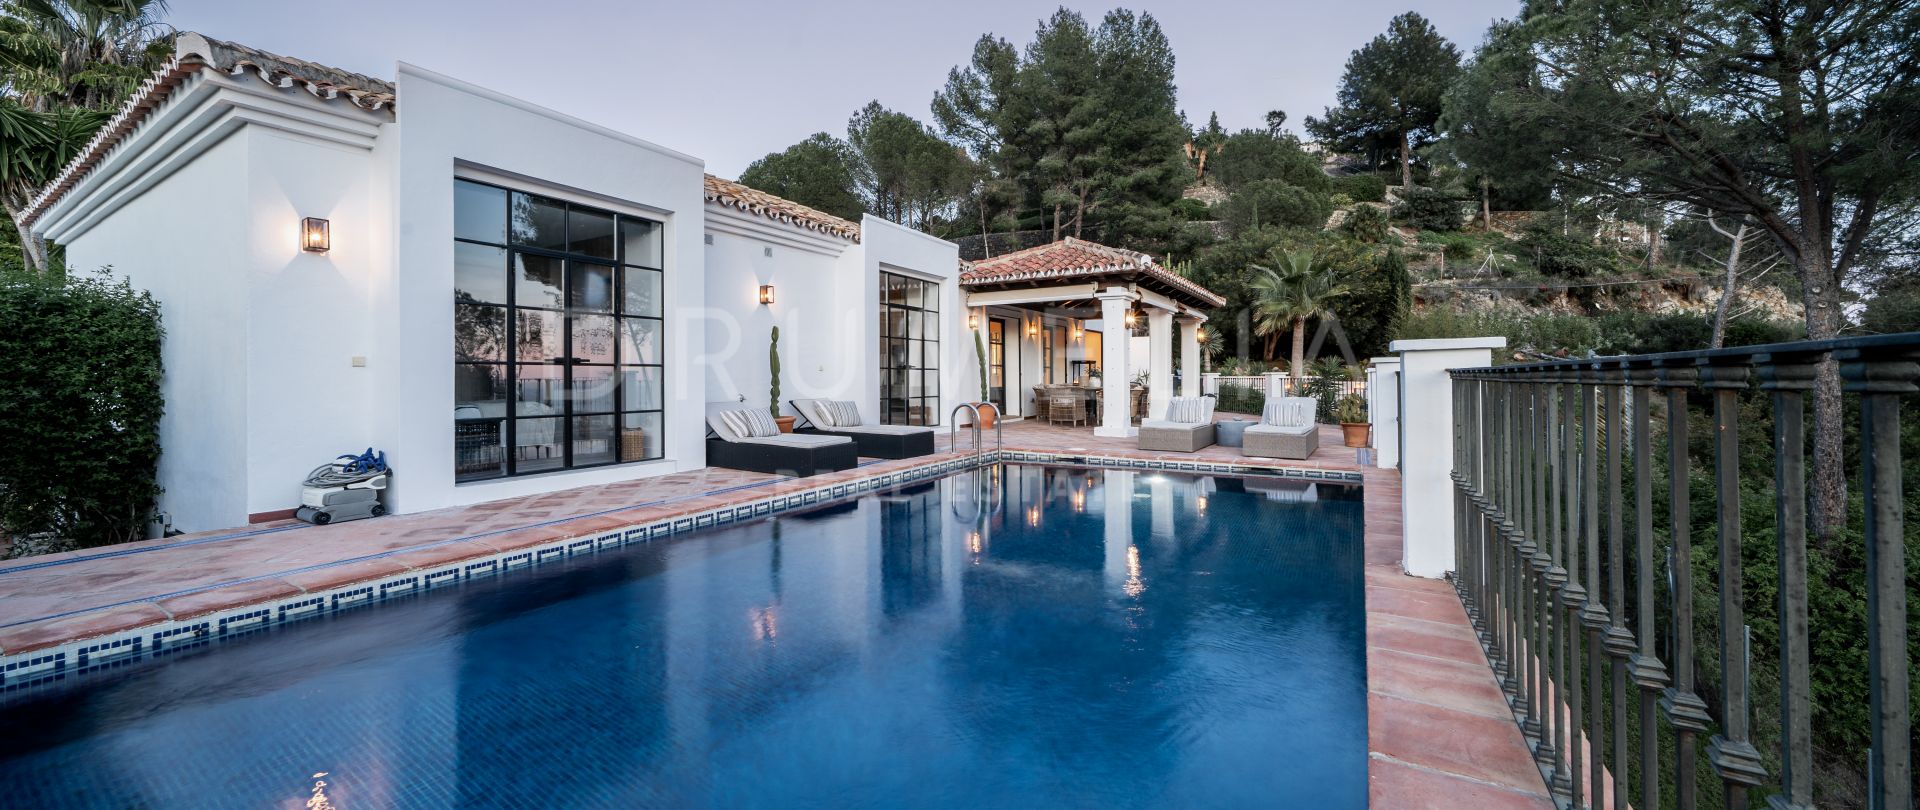 Exquisite Spanish Cortijo Style Villa with Unparalleled Sea and Mountain View in El Madroñal- Benahavis